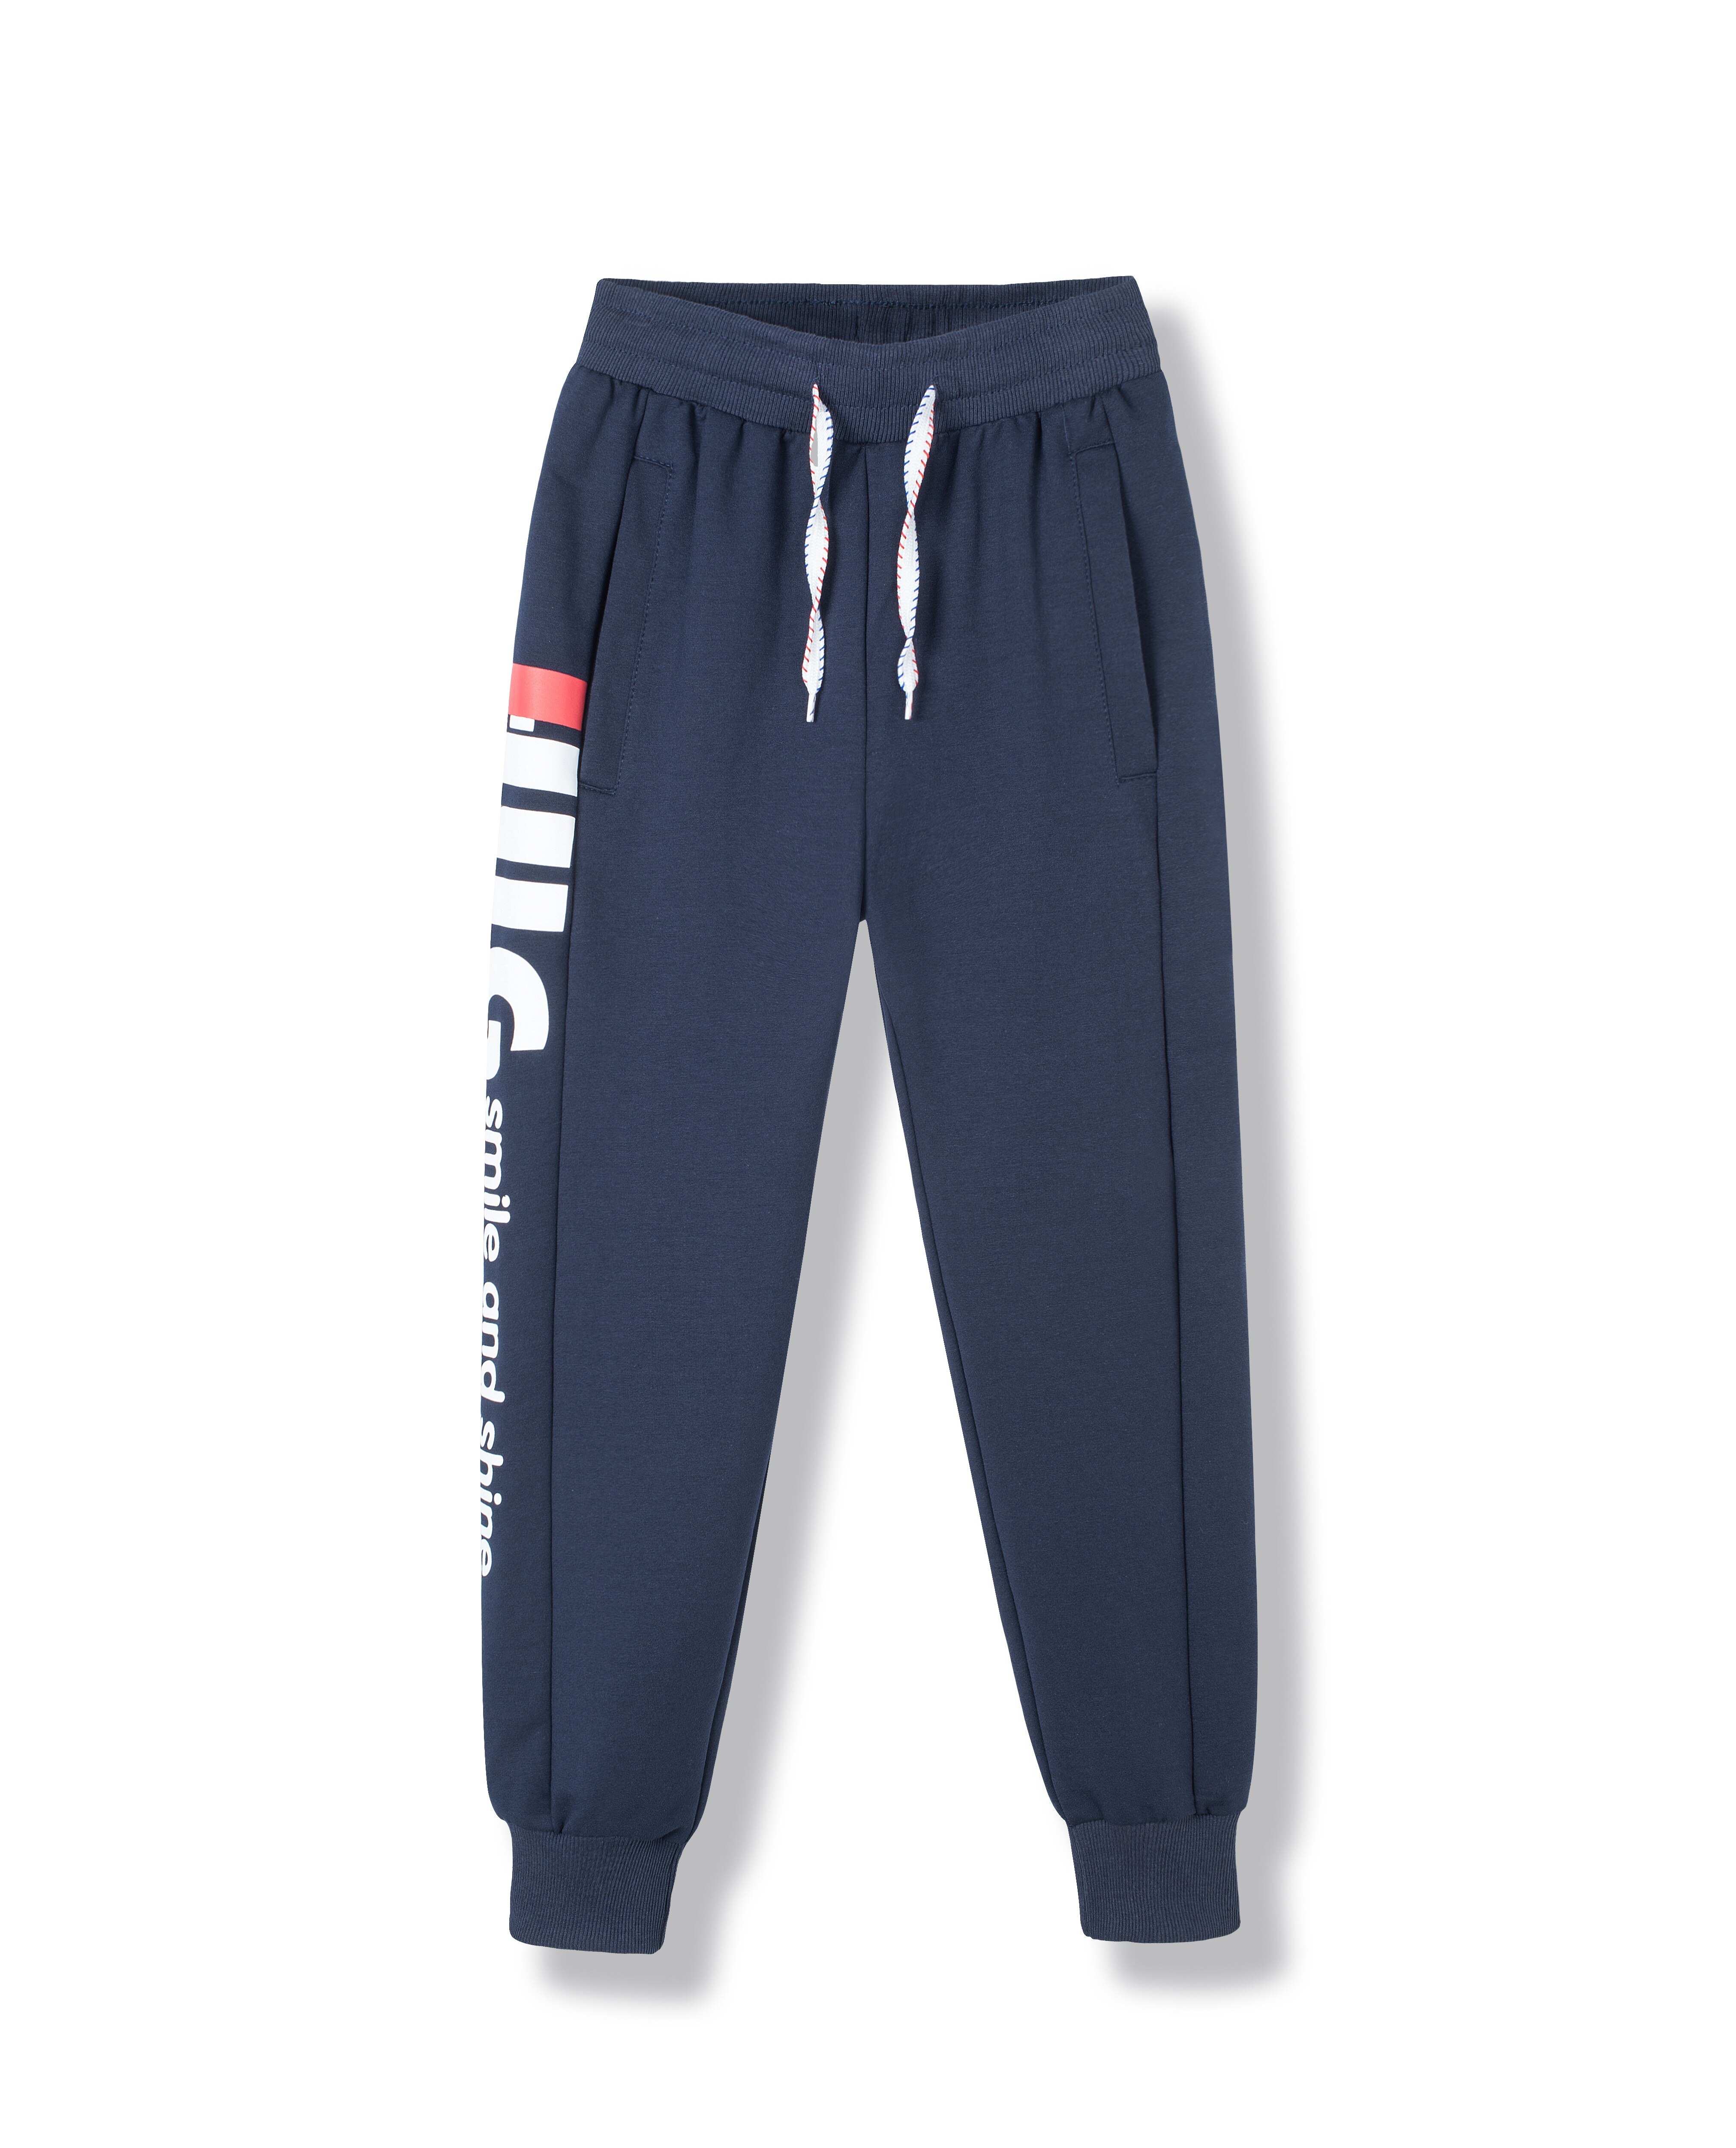 Boys-Casual-Comfortable-Solid-Active-Sweatpants-Quick-drying-Elastic-Waist-Breathable-Jogger-Sports-Pants-Kids-Clothing-2